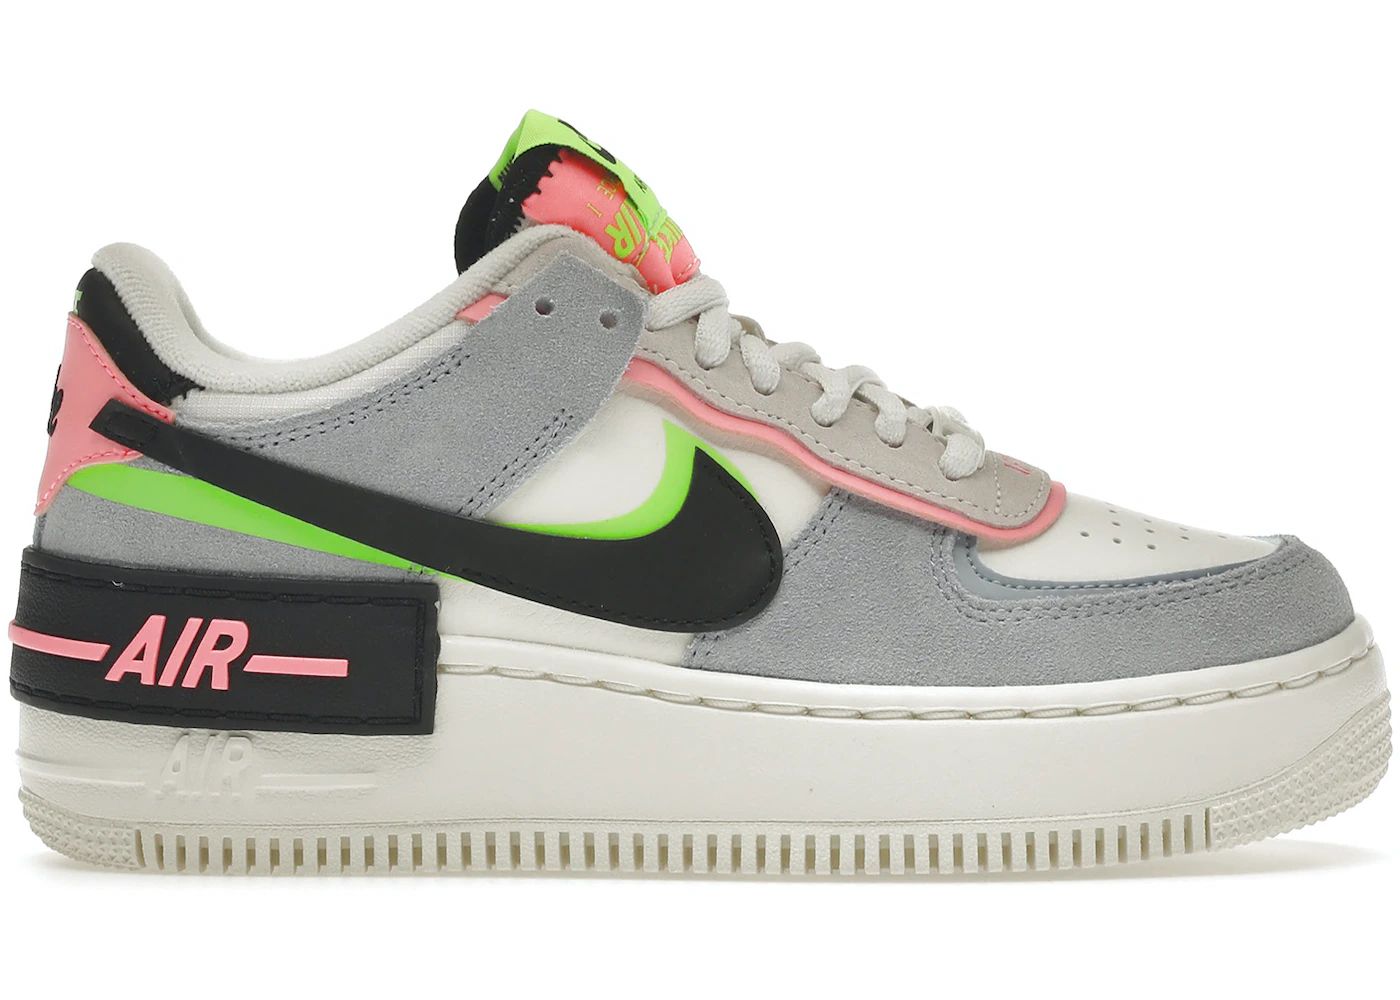 Nike Air Force 1 Low ShadowSunset Pulse (Women's) | StockX